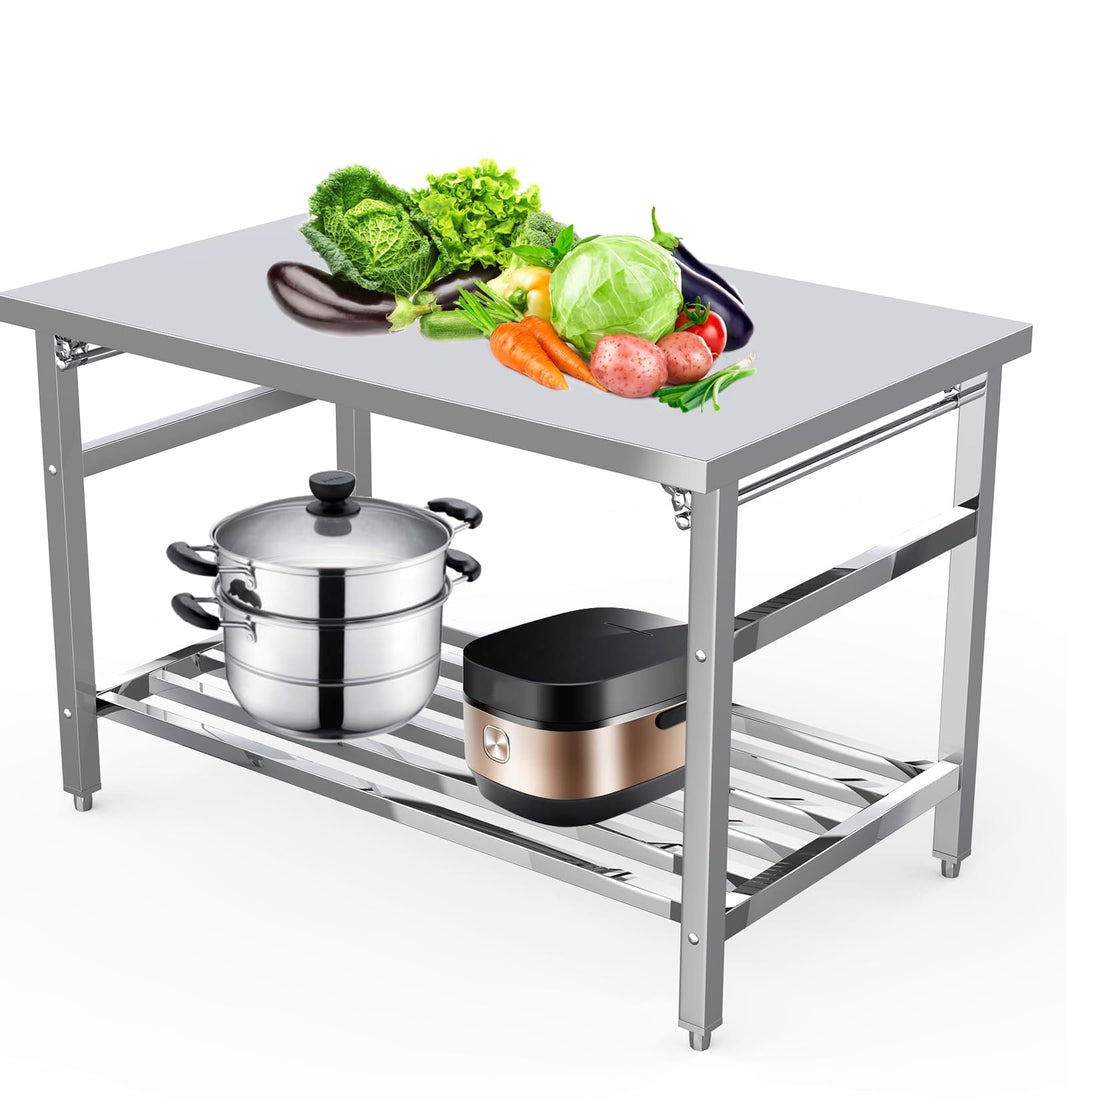 30x48" Stainless Steel Work Table with Adjustable Shelf